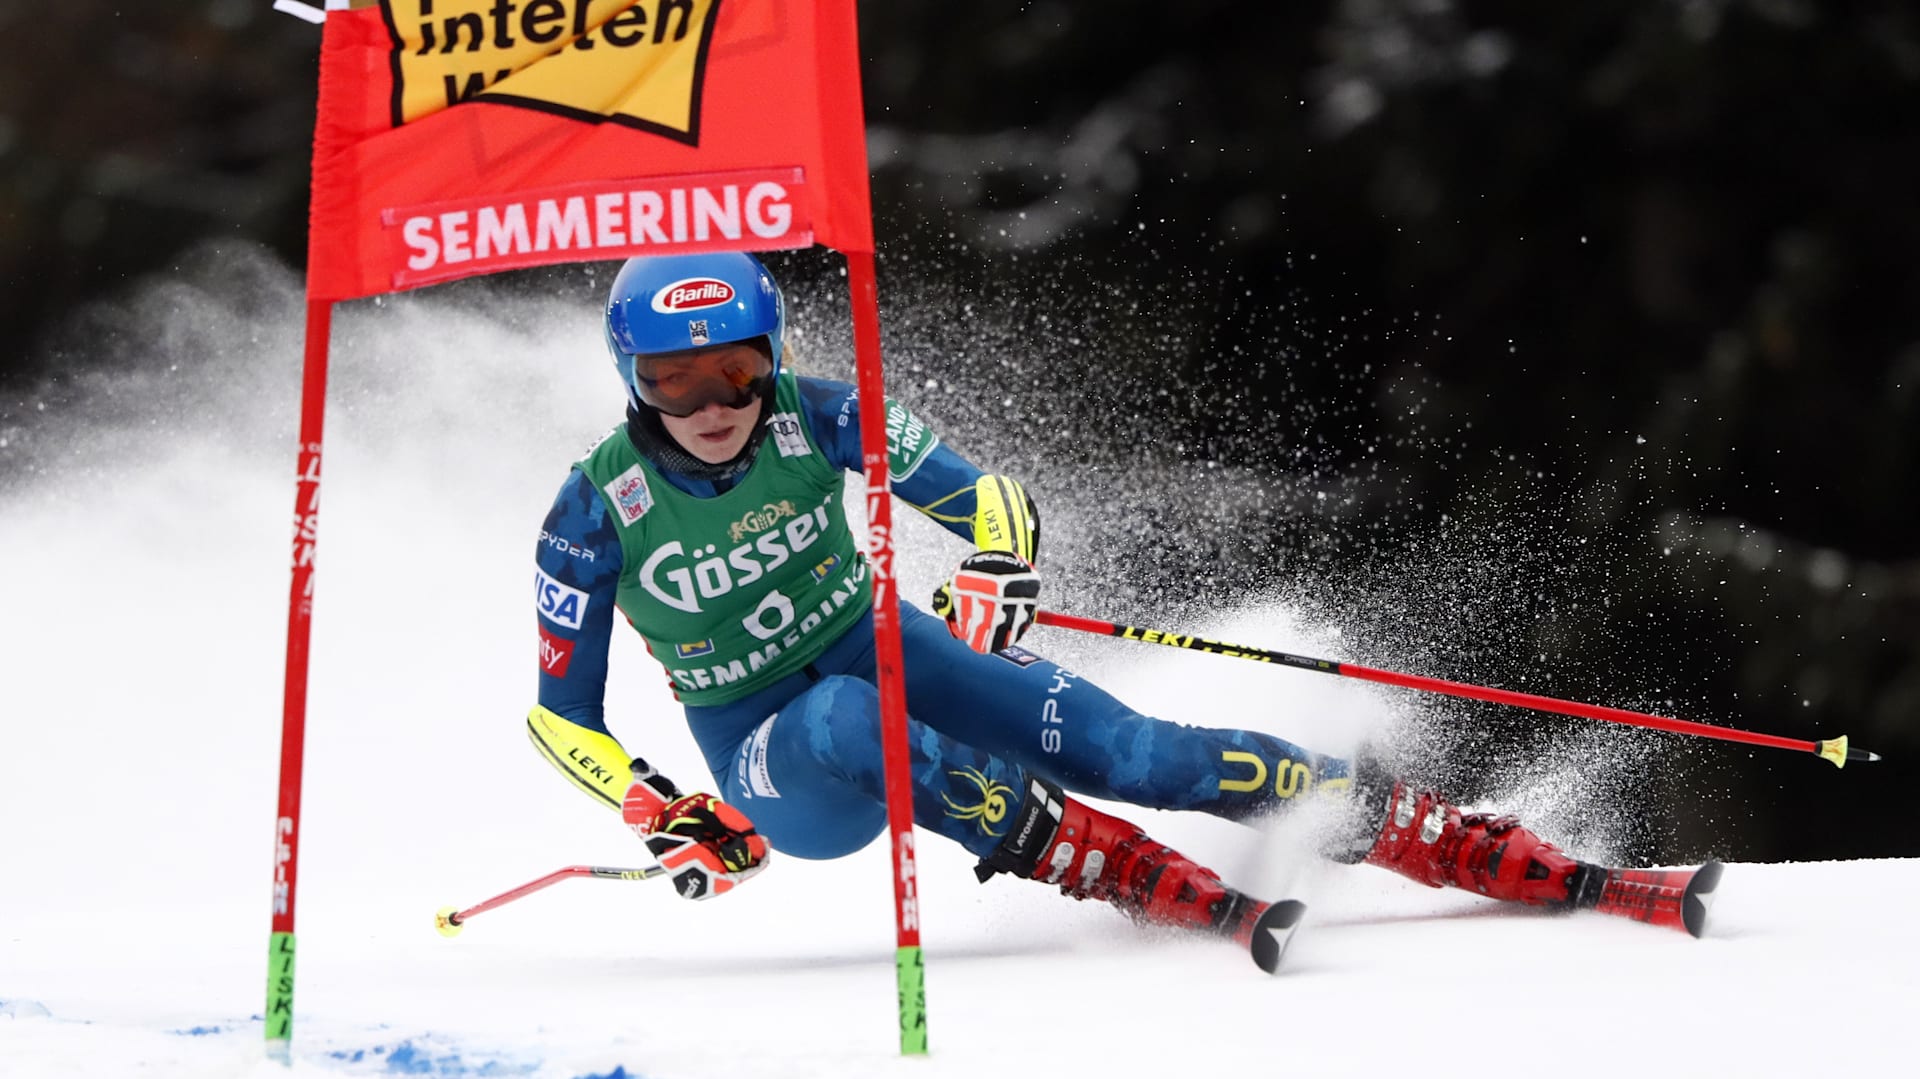 Alpine skiing How to watch Mikaela Shiffrin live in Semmering from December 27-29